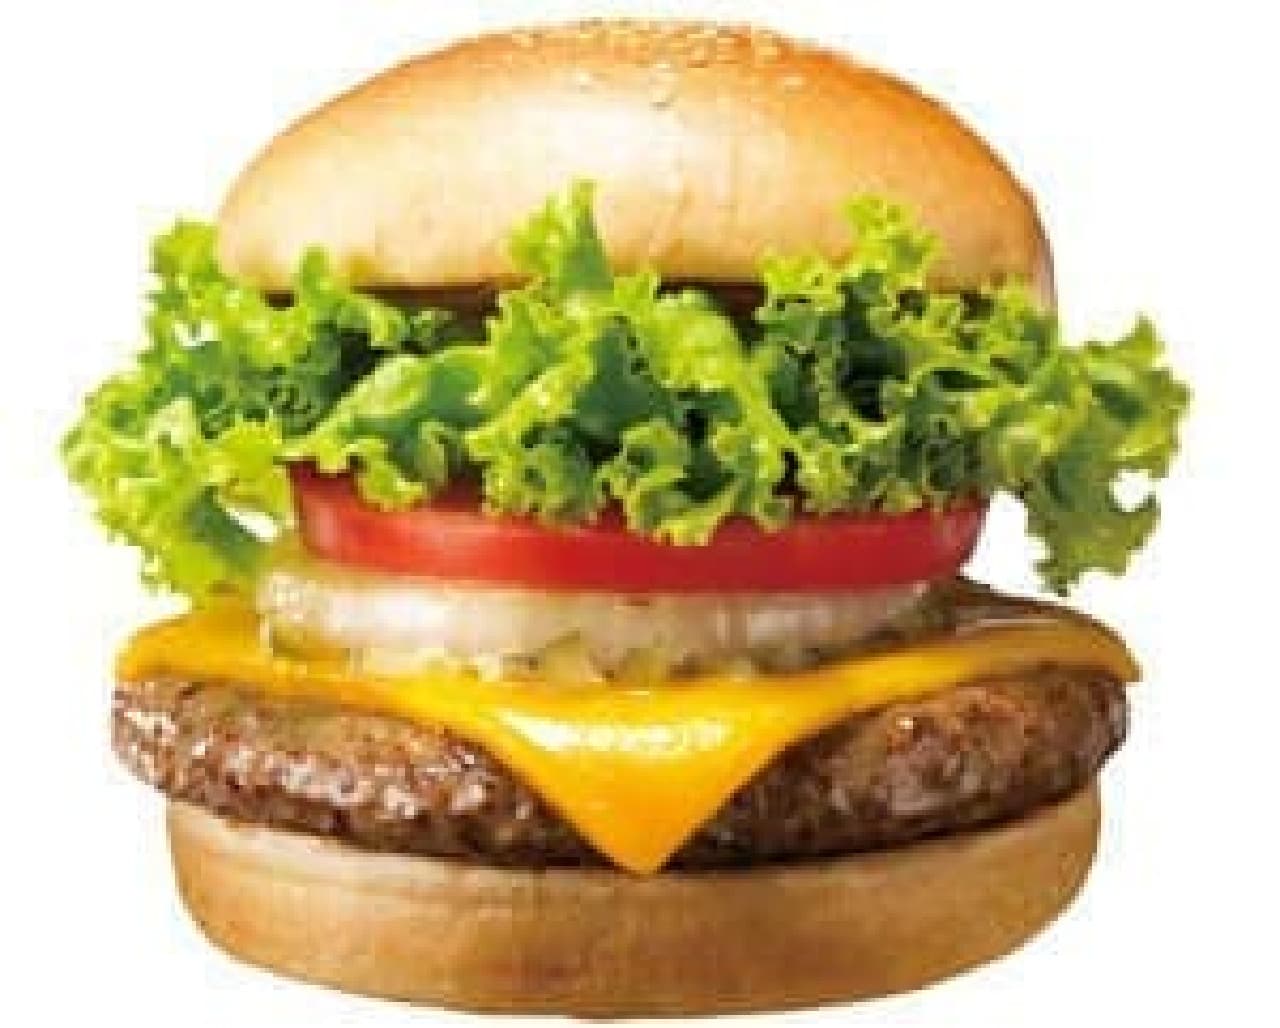 For allies with strong sugar restrictions? (The image is a normal "classic cheeseburger")